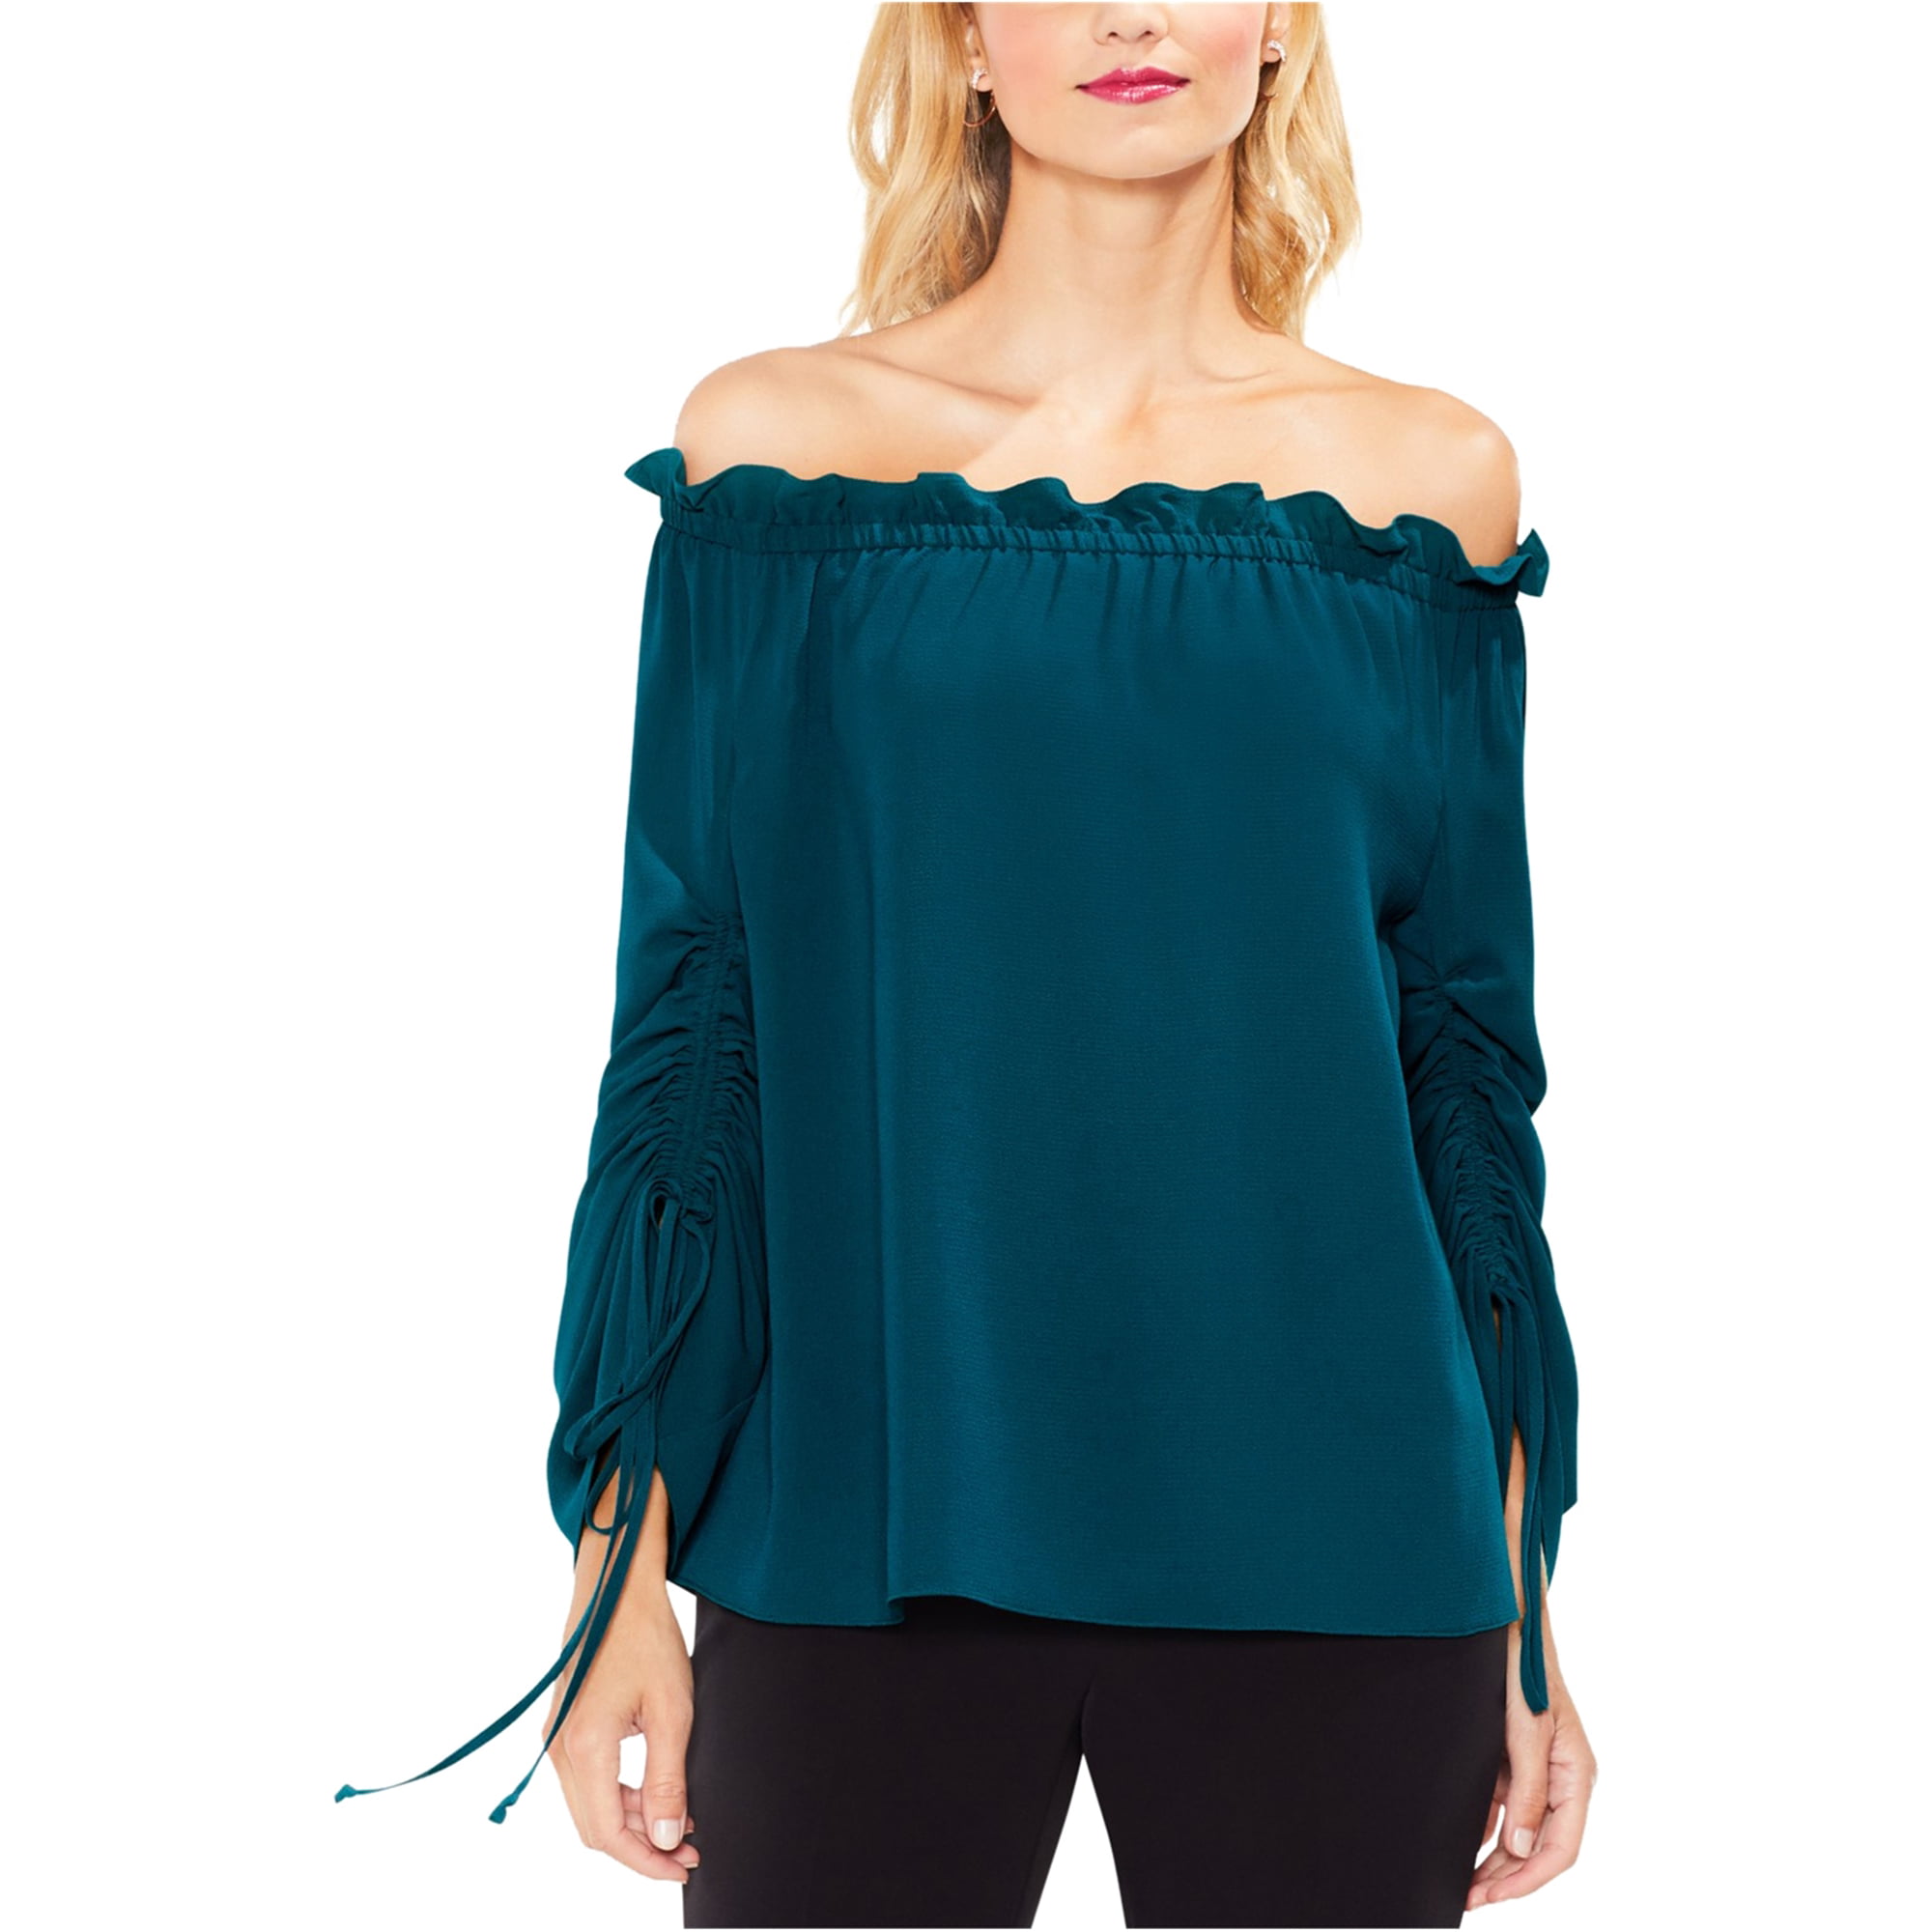 Vince Camuto - Vince Camuto Womens Ruched Sleeve Off the Shoulder